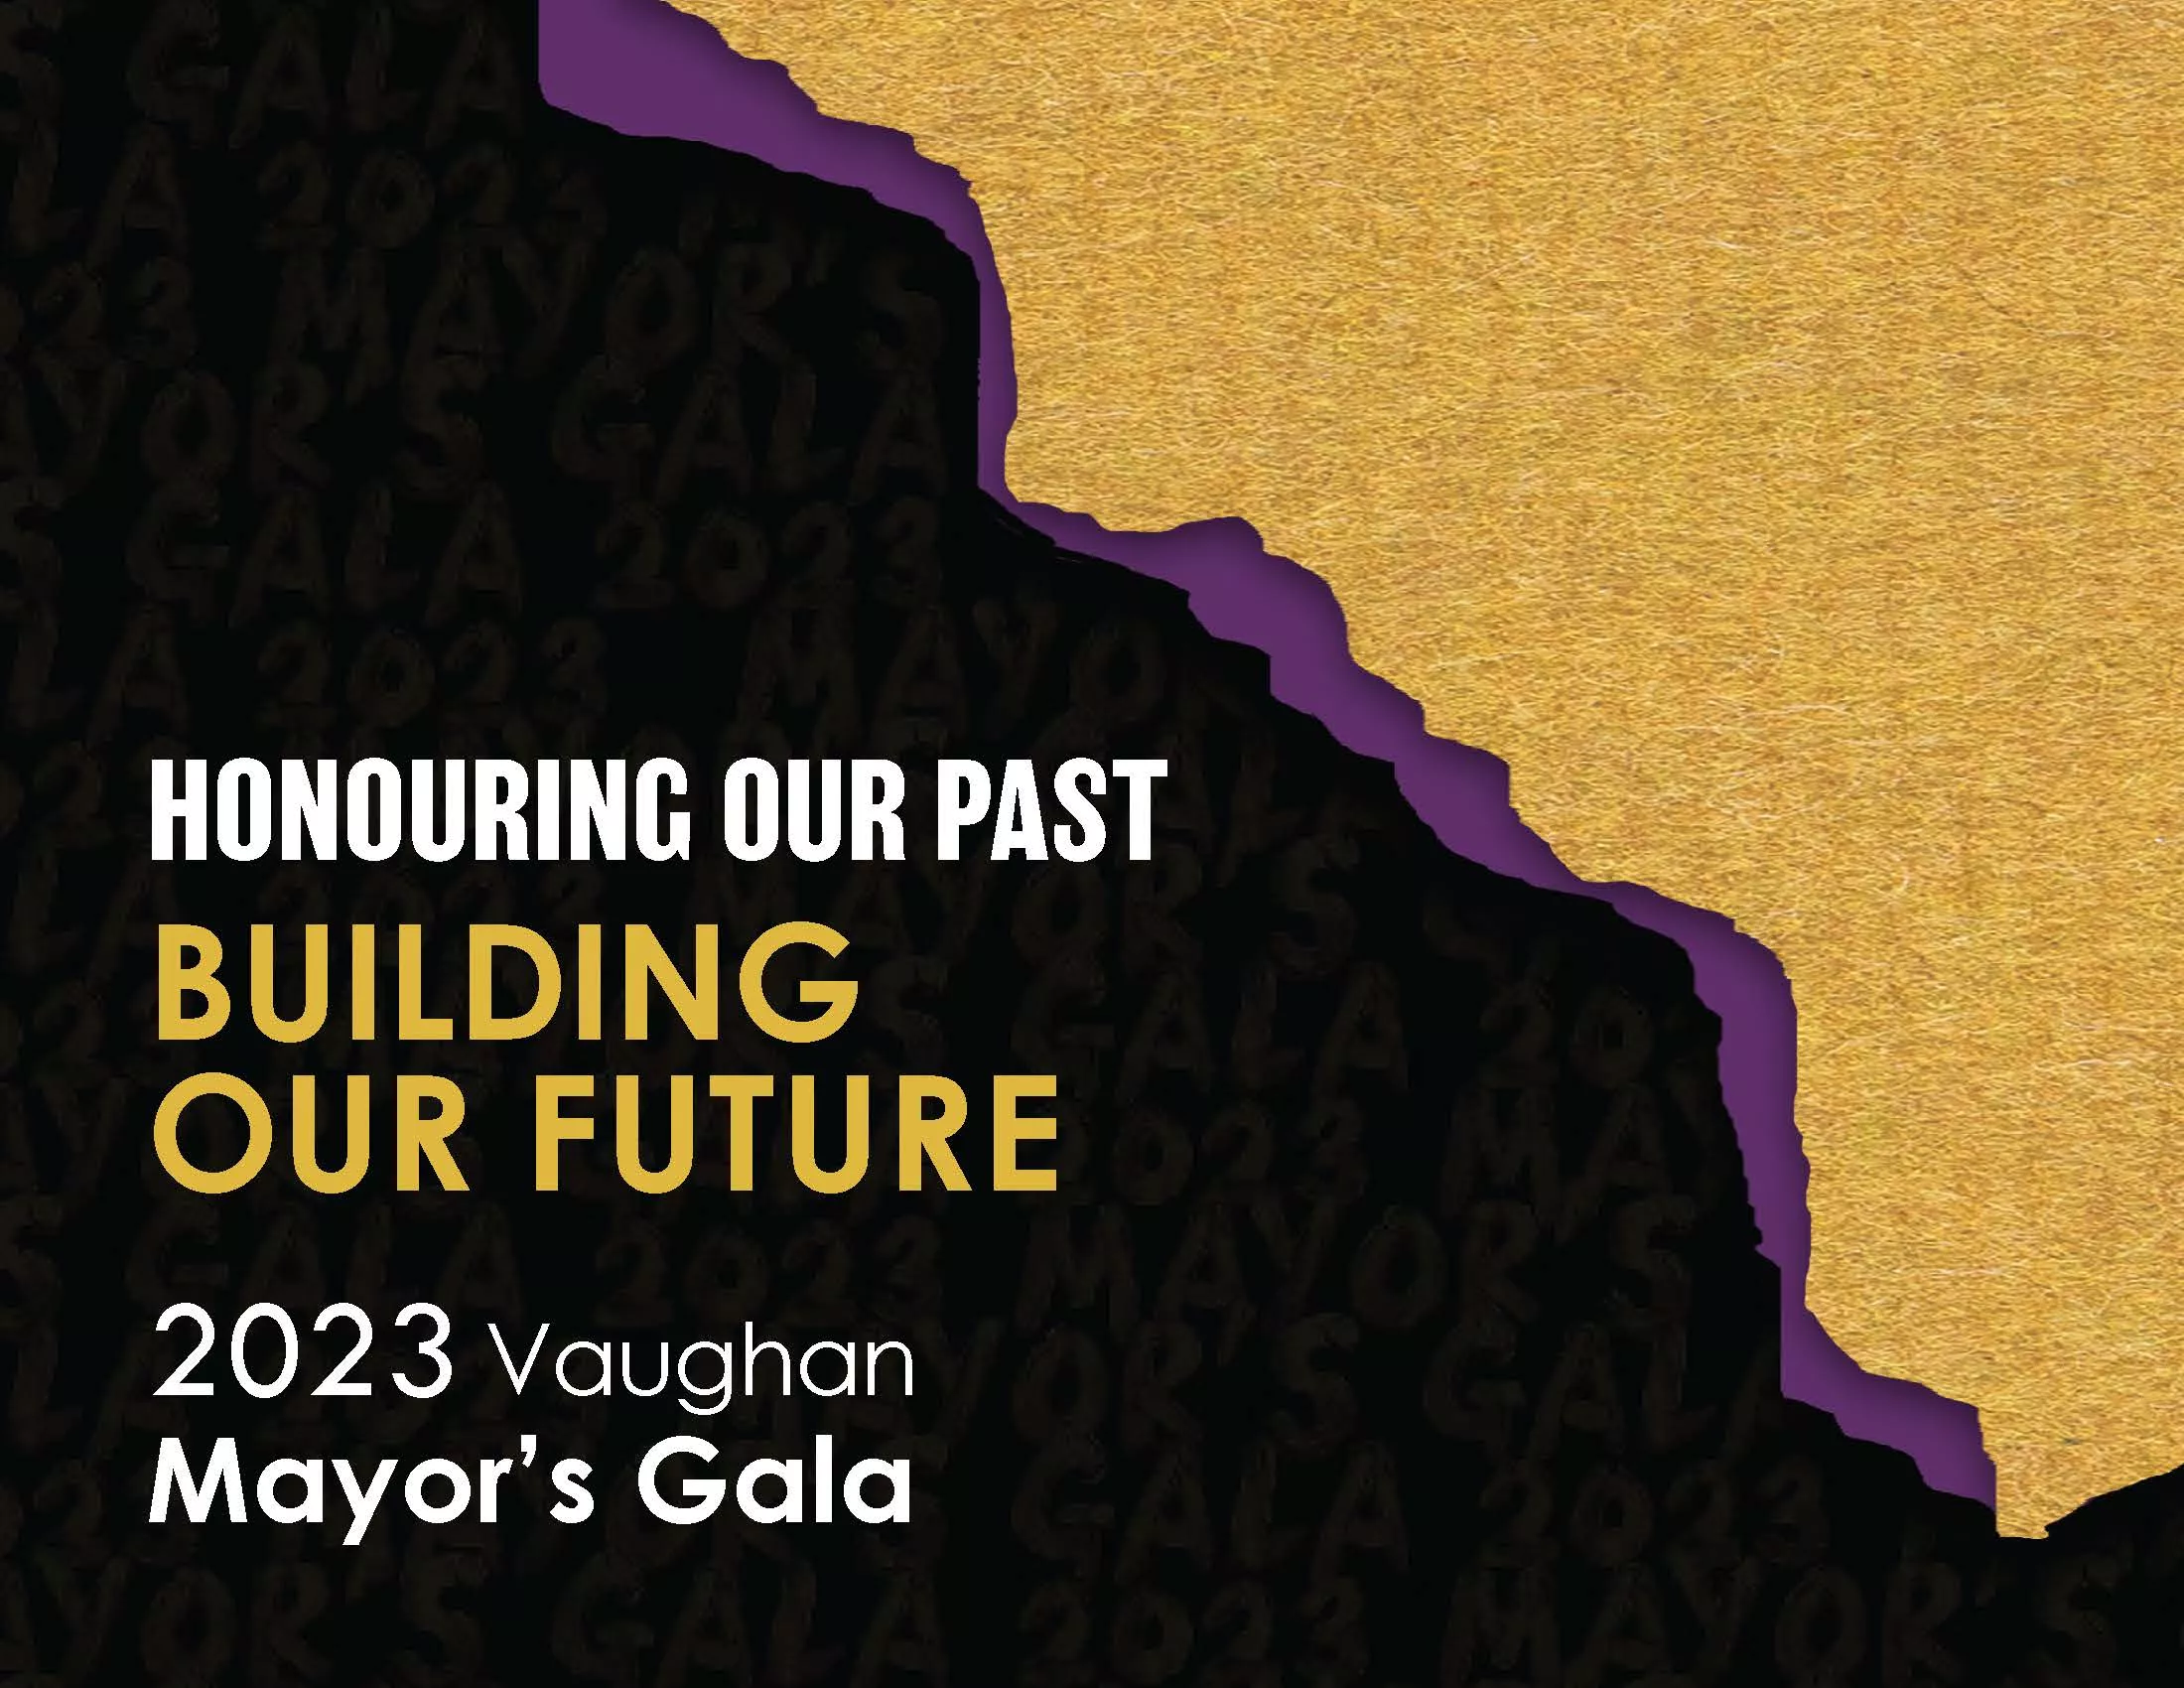 2023 Vaughan Mayor's Gala Honouring Our Past Building Our Future 